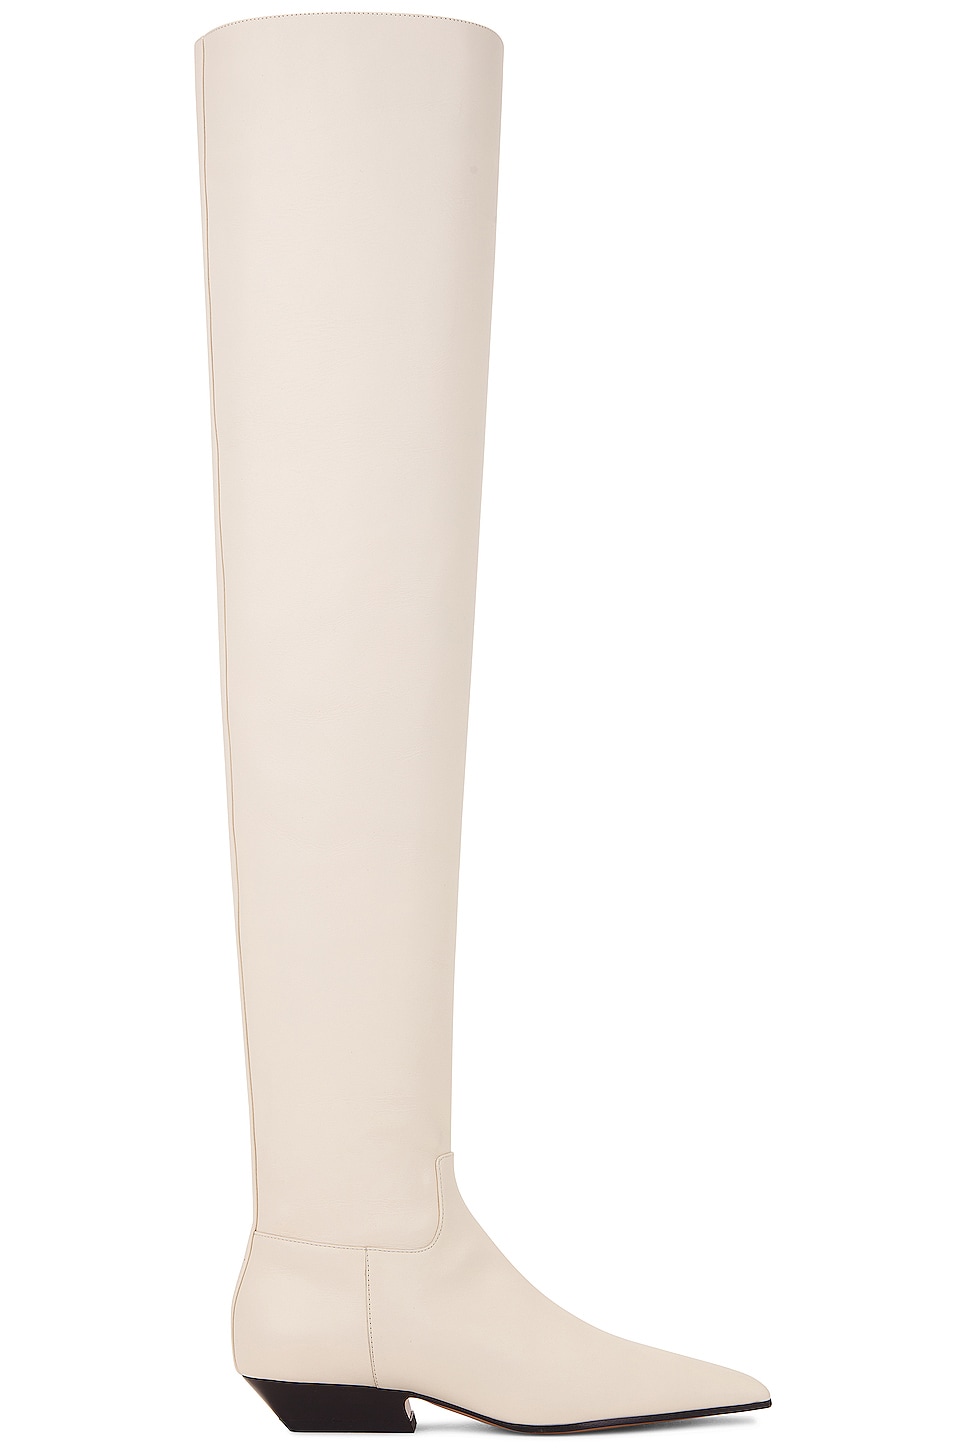 Image 1 of KHAITE Marfa Classic Flat Over The Knee Boot in Off White